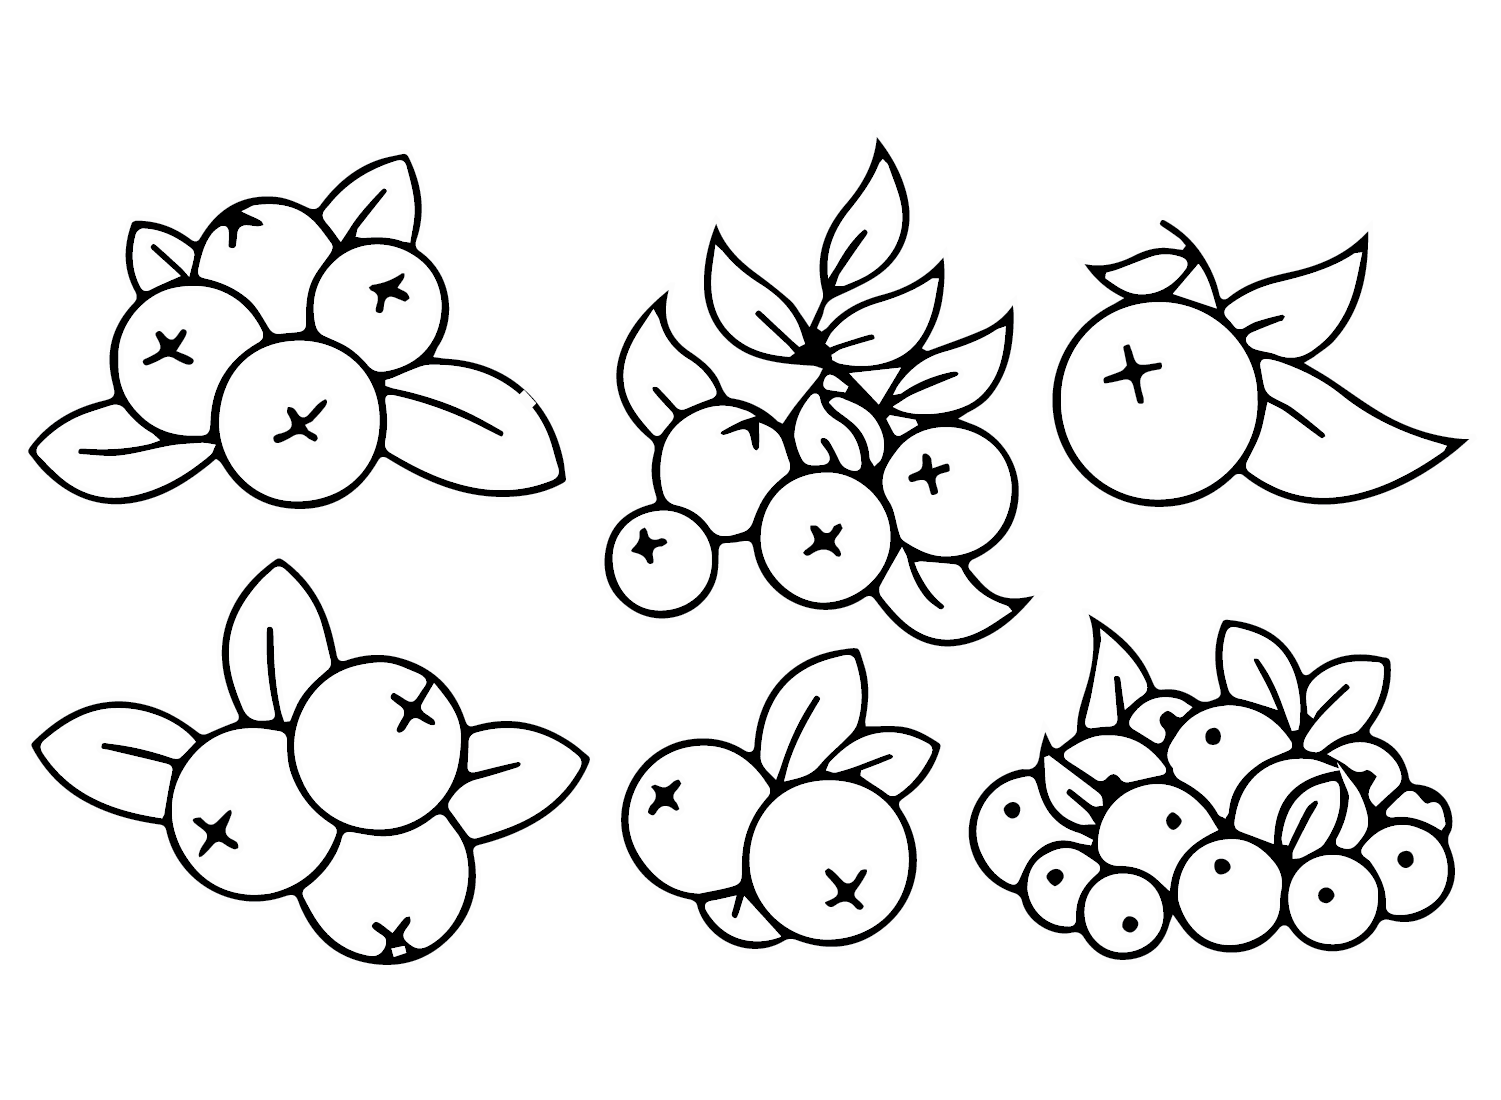 Cranberry Images Coloring Page